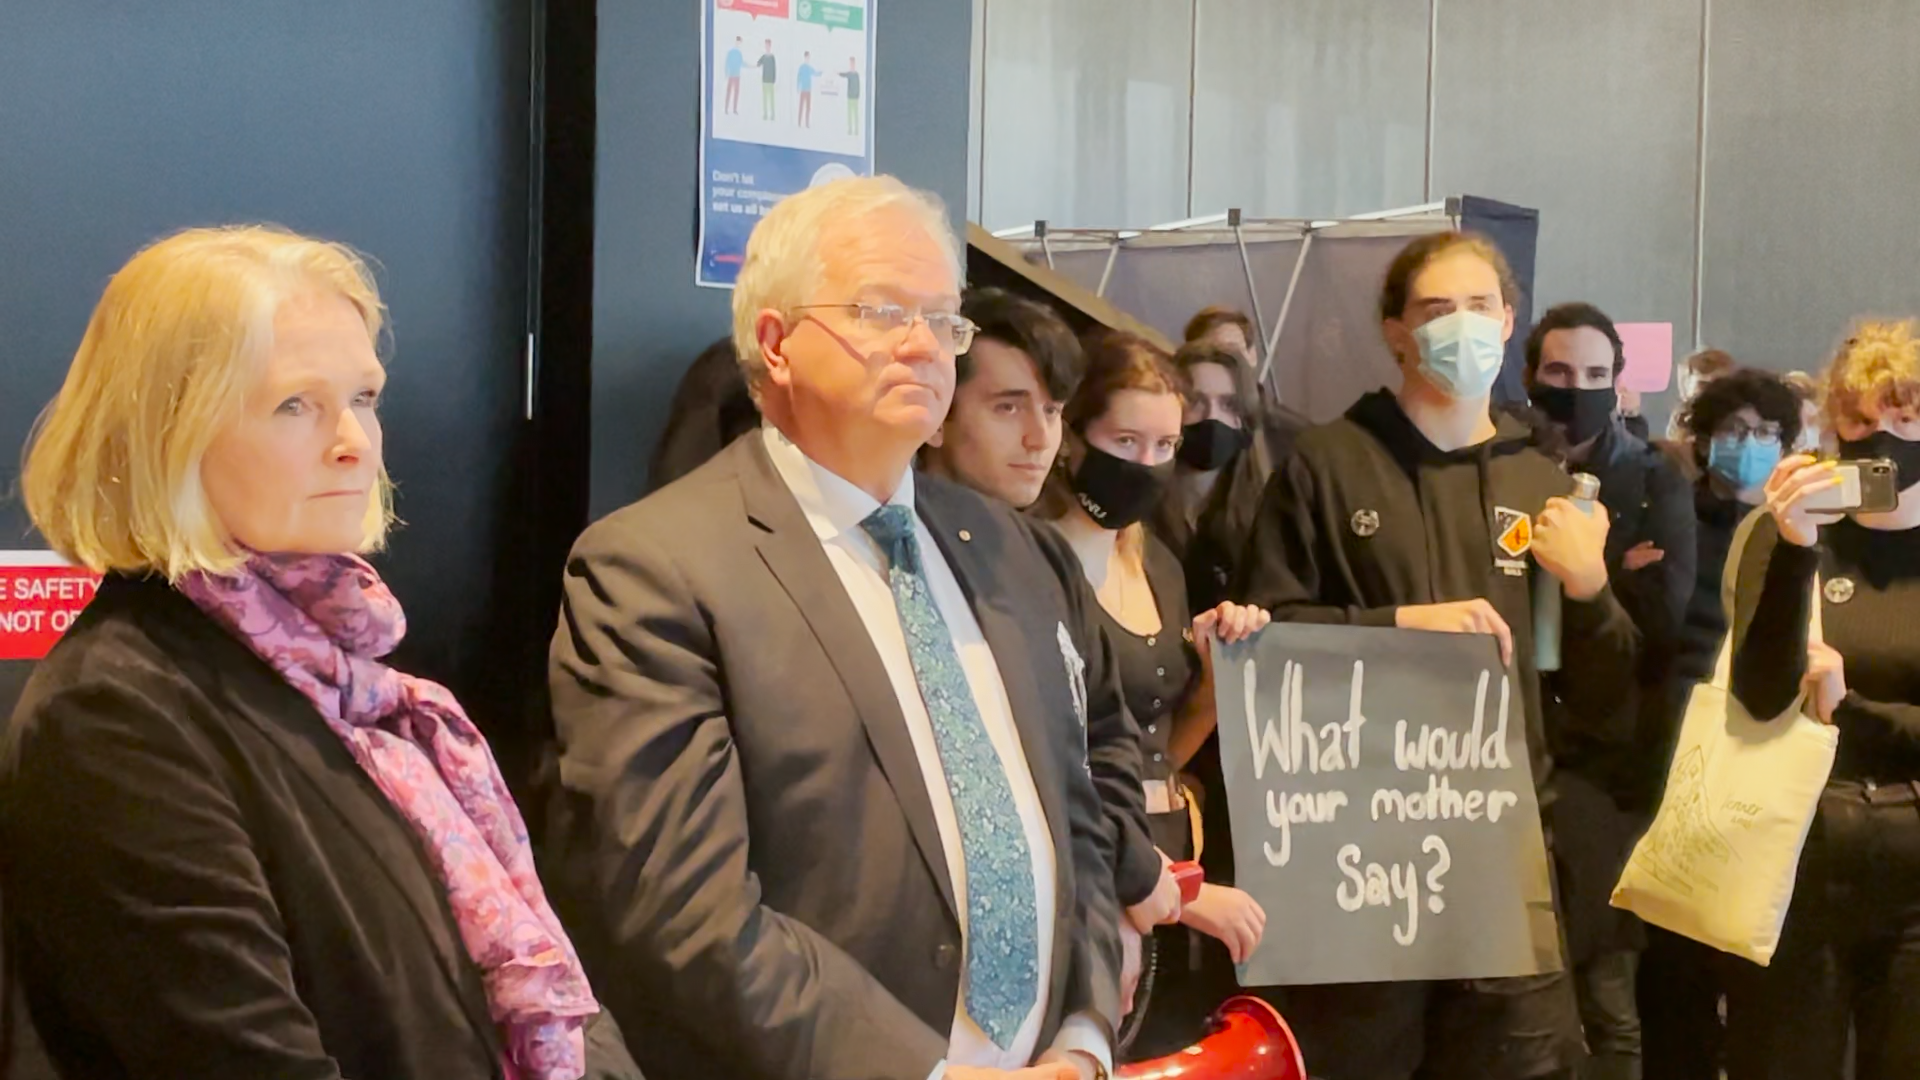 Brian Schmidt AC and Grady Venville, surrounded by student protestors who are expressing their discontent with the ANU's lack of action on a Human Rights Commission report into sexual harassment and assault on campus.